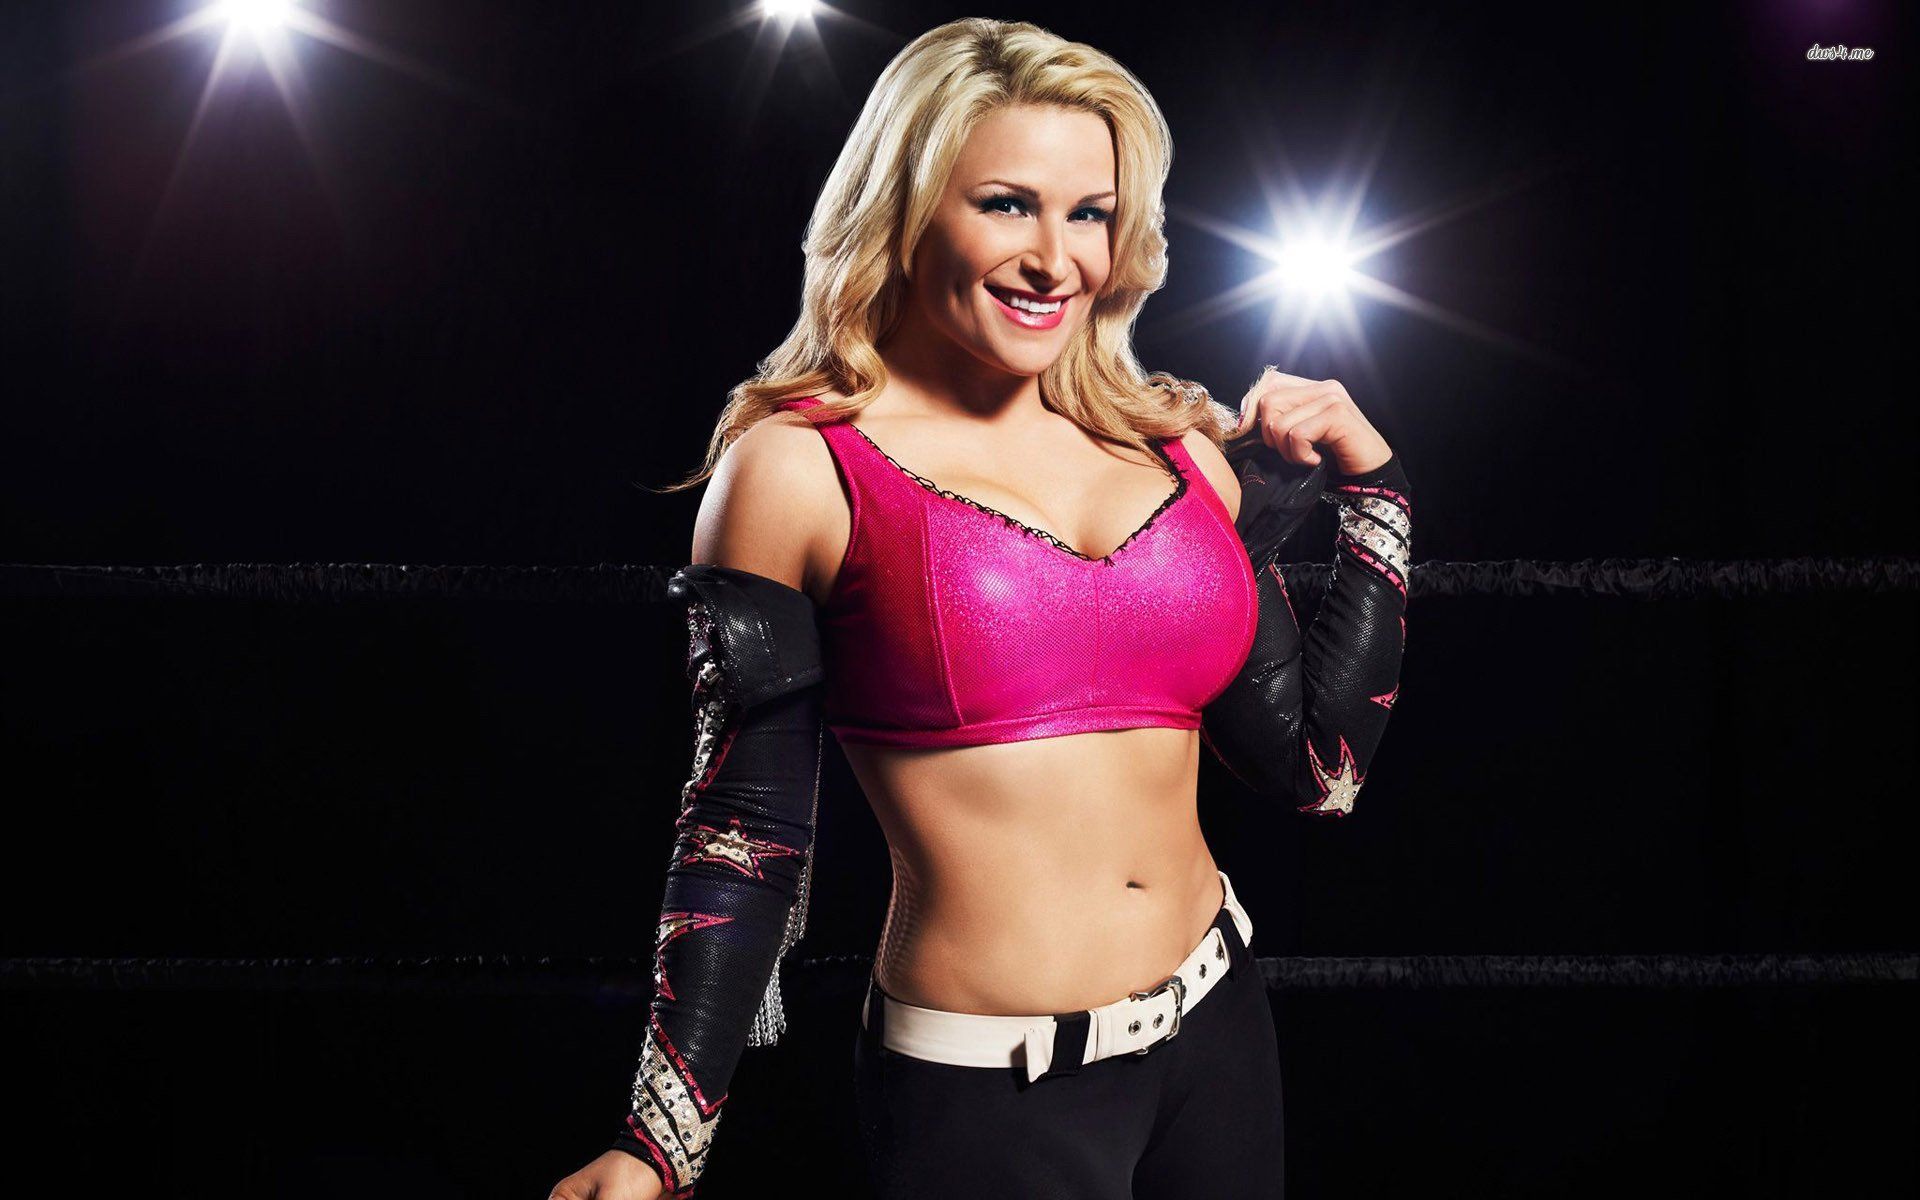 37 Hot Pictures Of Natalya Neidhart From WWE Will Make You Crave.